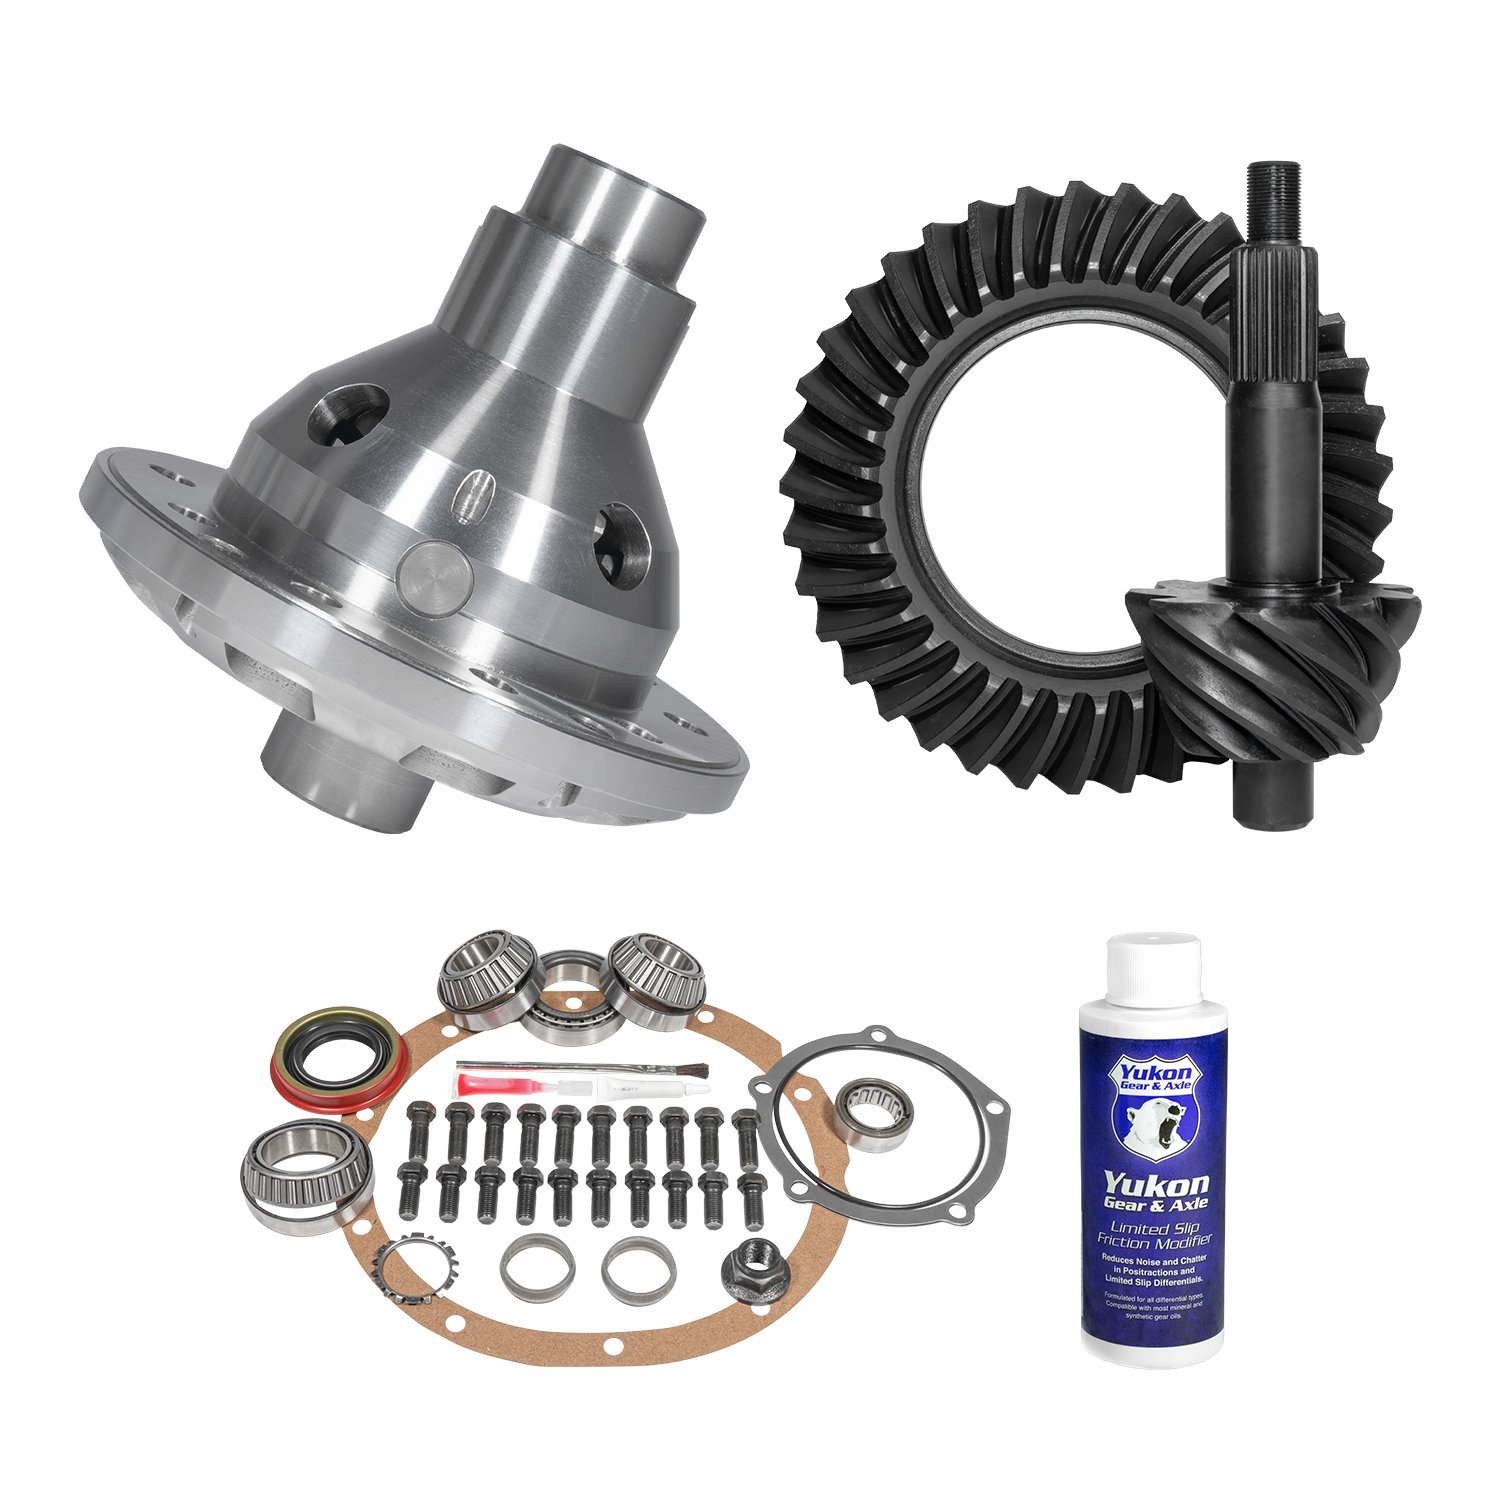 Muscle Car Limited Slip & Re-Gear Kit For Ford 9 in., 28 Spline, 3.00 Ratio